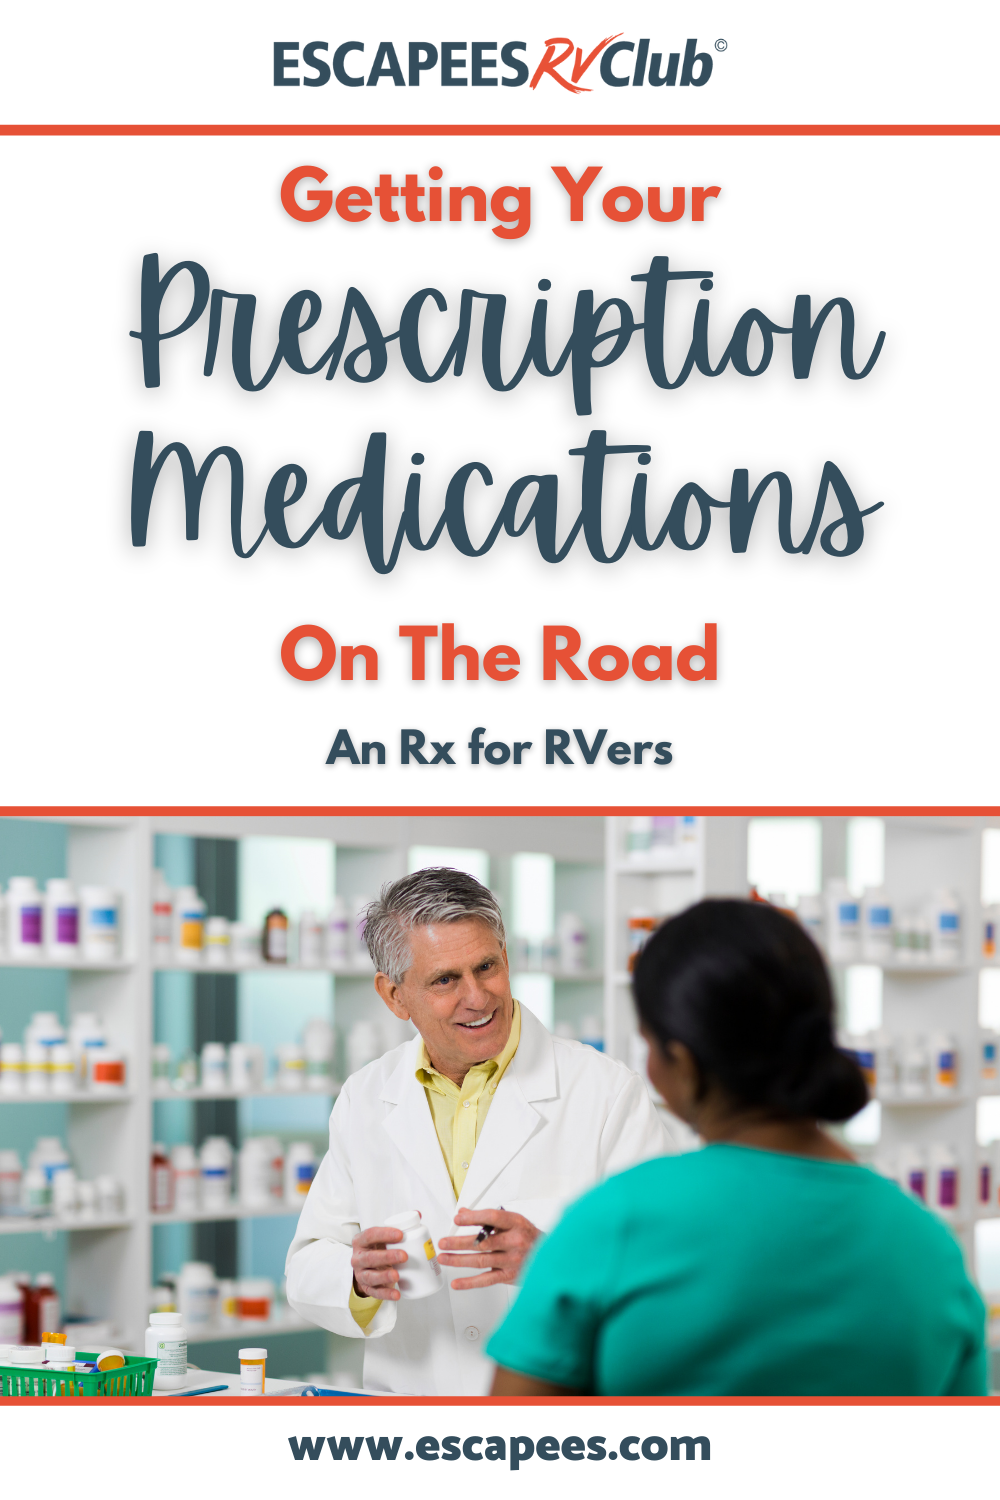 Getting Your Prescription Medications on the Road - An Rx for RVers 67